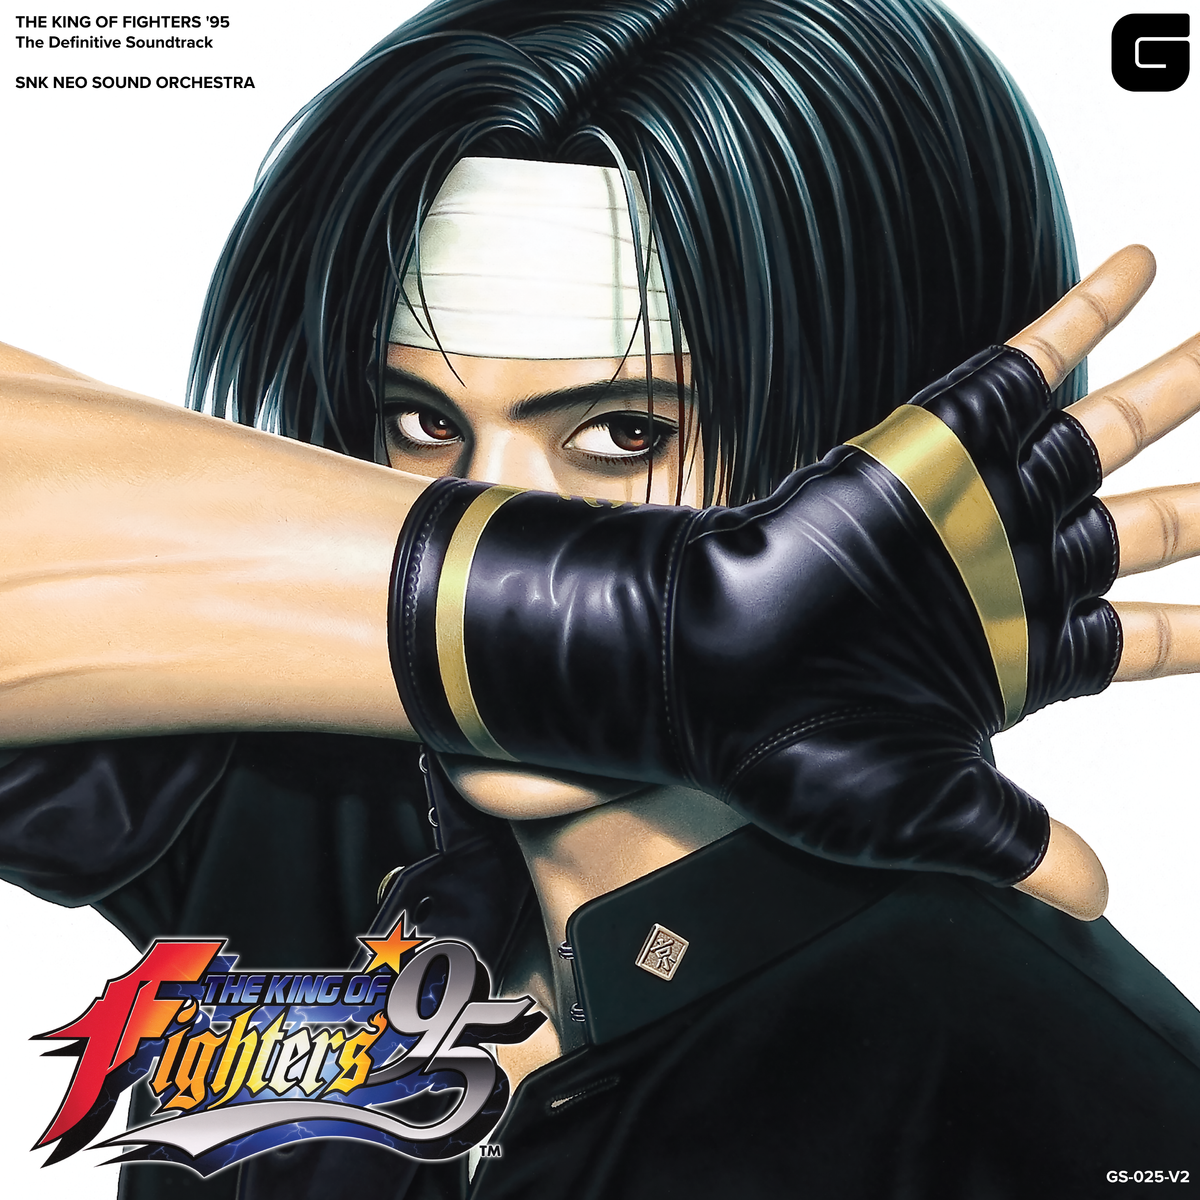 The King of Fighters '95 - The Definitive Soundtrack